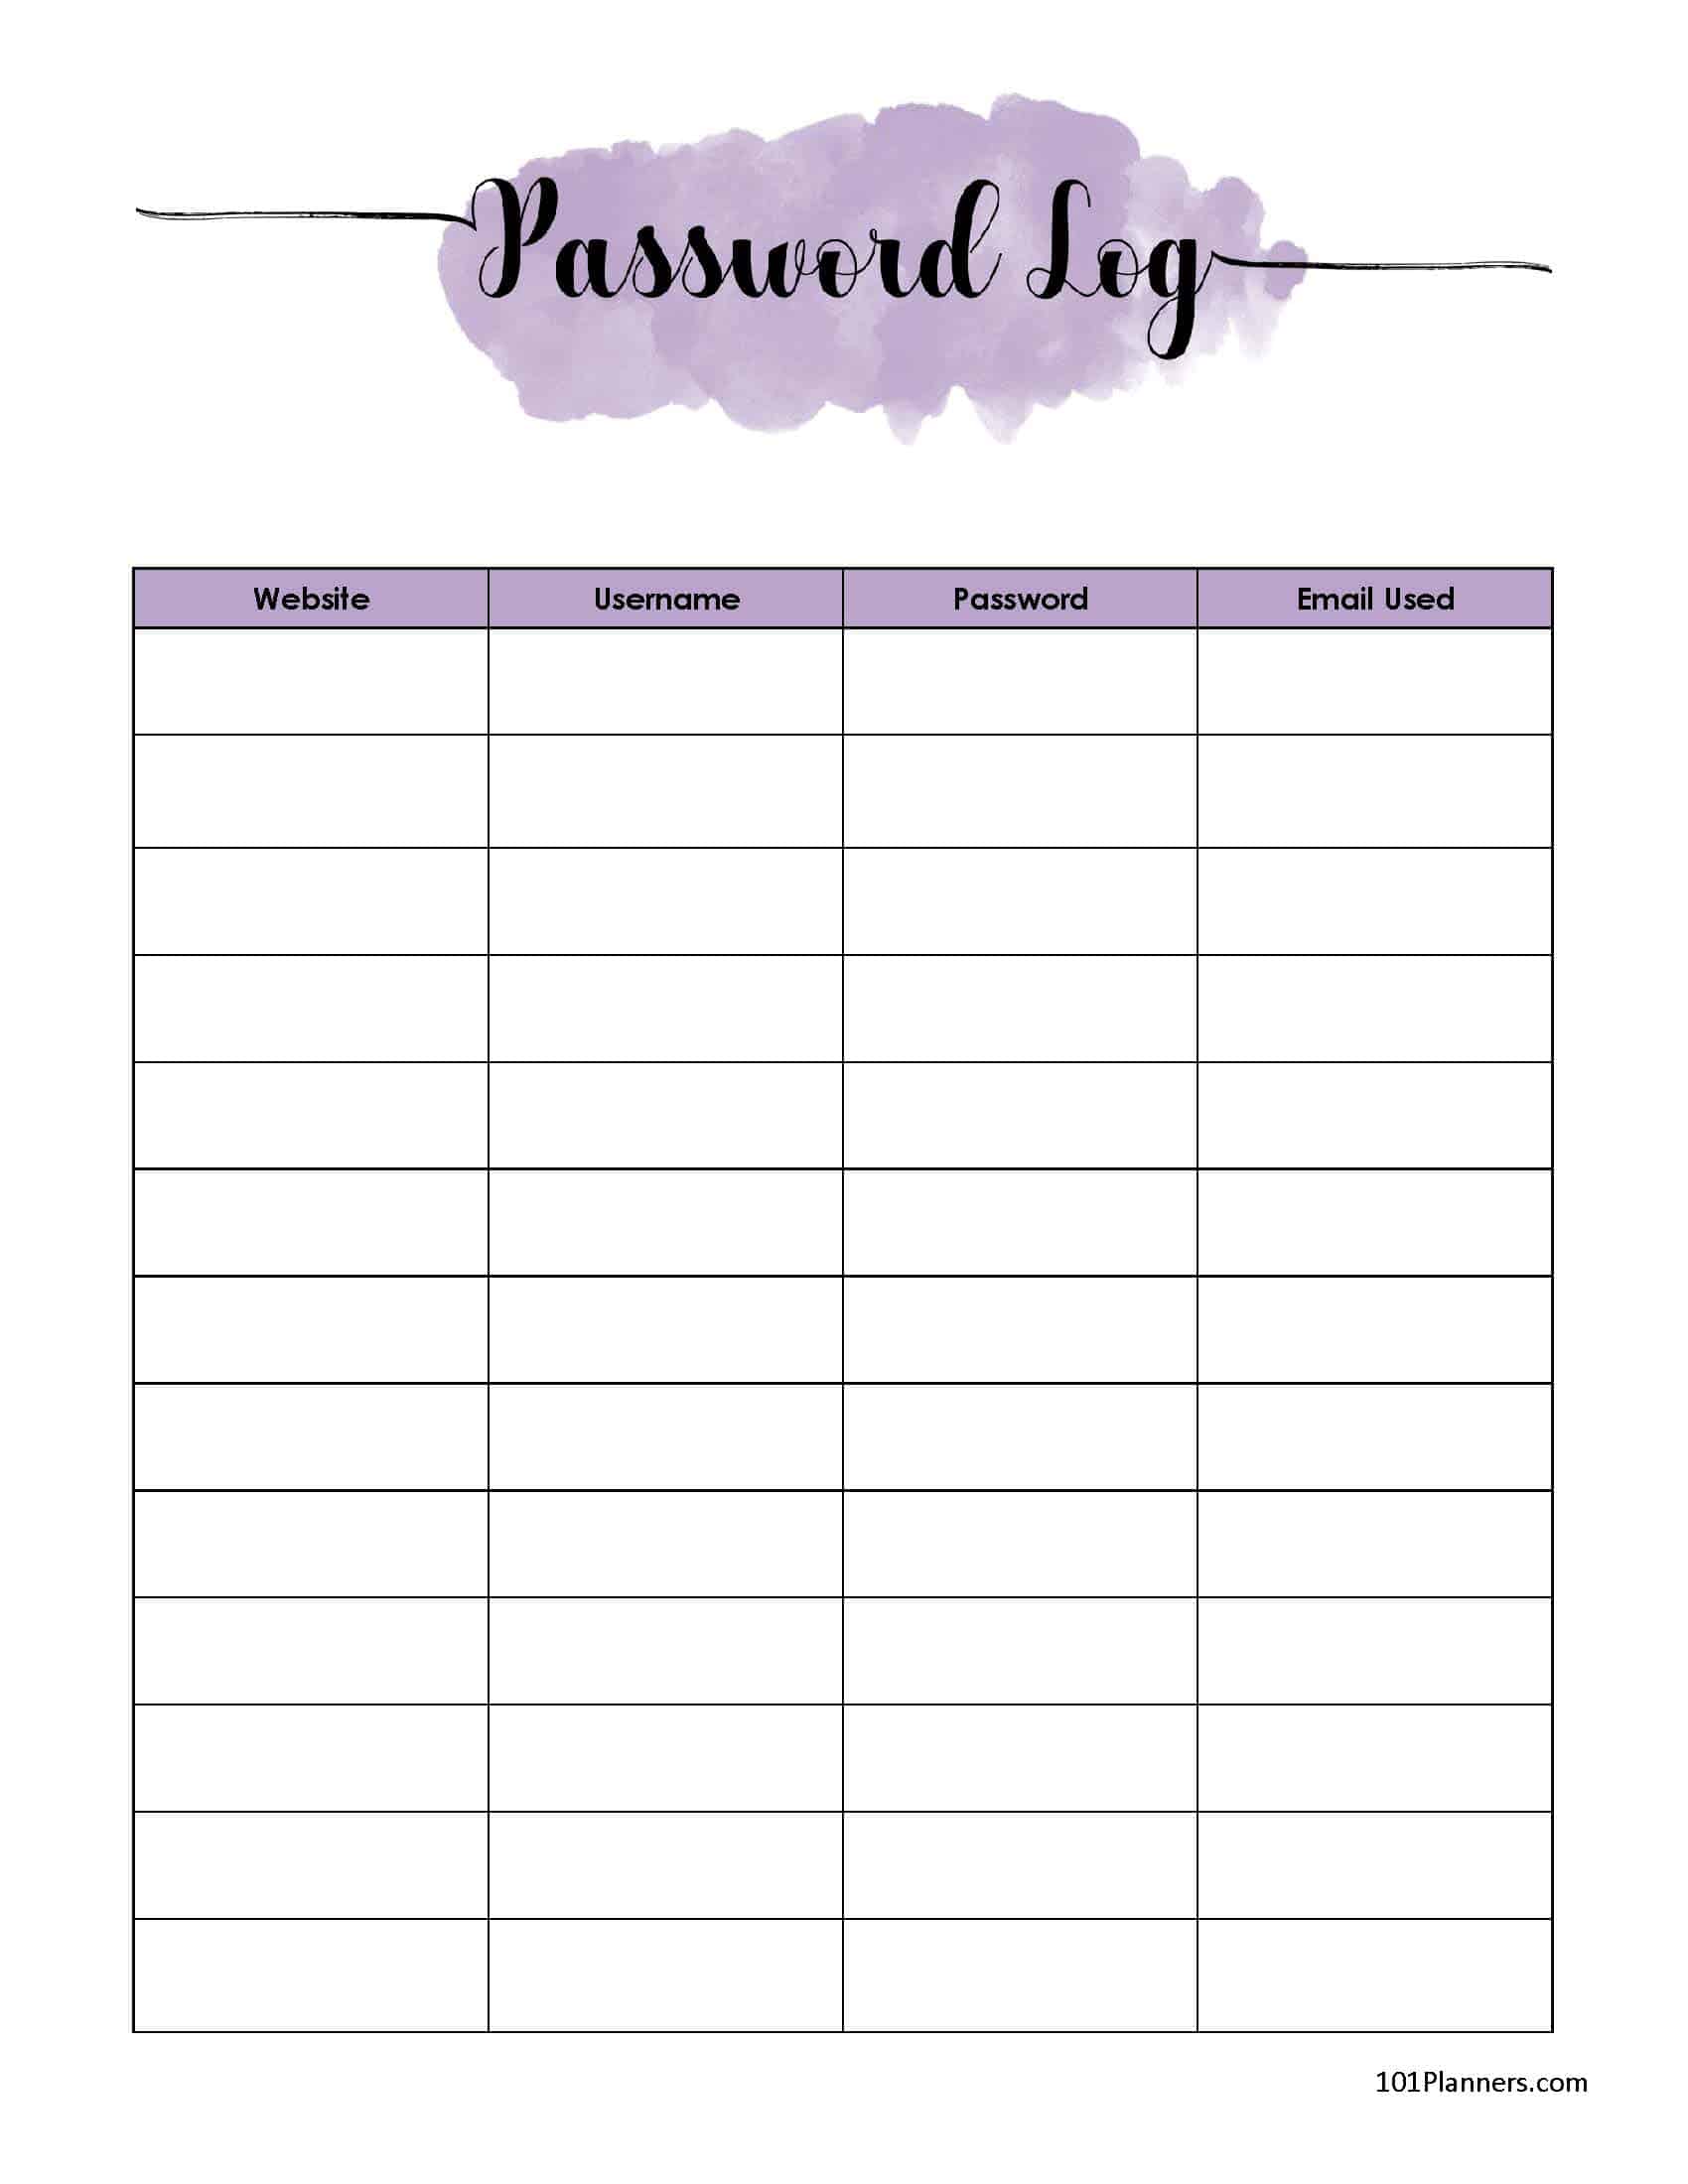 top-5-password-organizer-templates-free-to-download-in-pdf-format